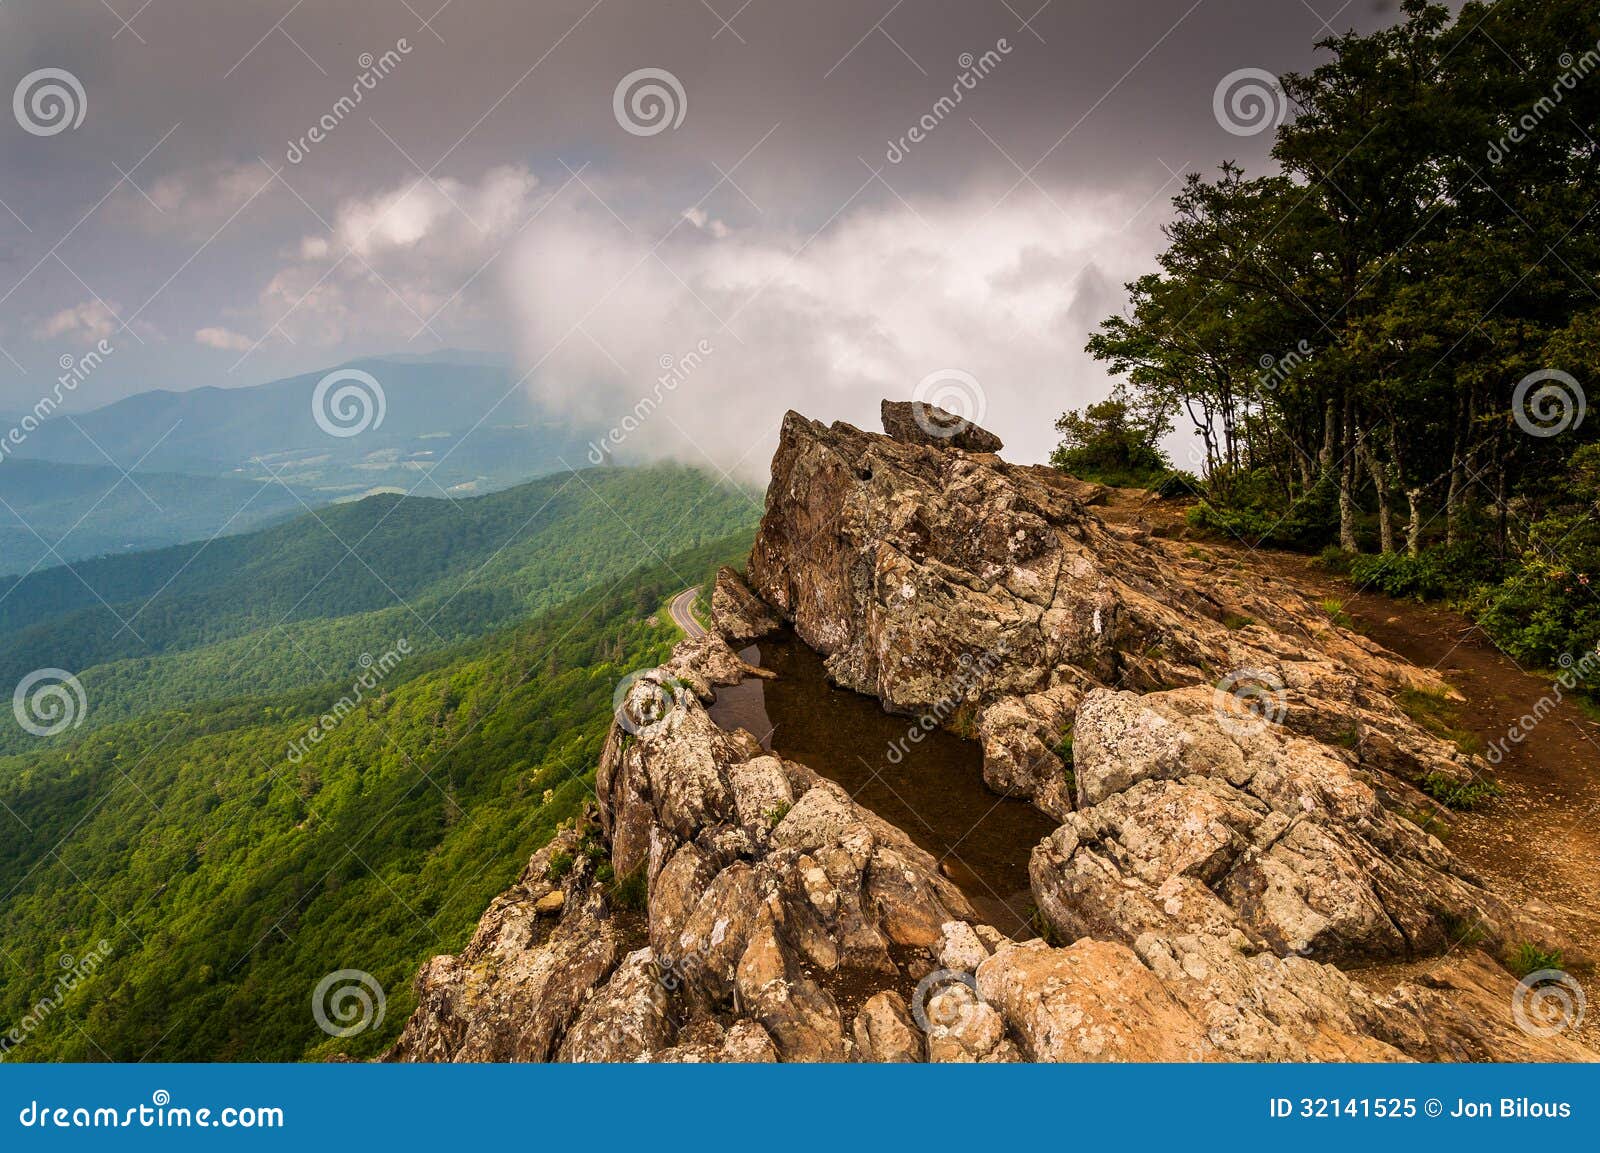 cloudy spring view from little stony man cliffs in shenandoah national park